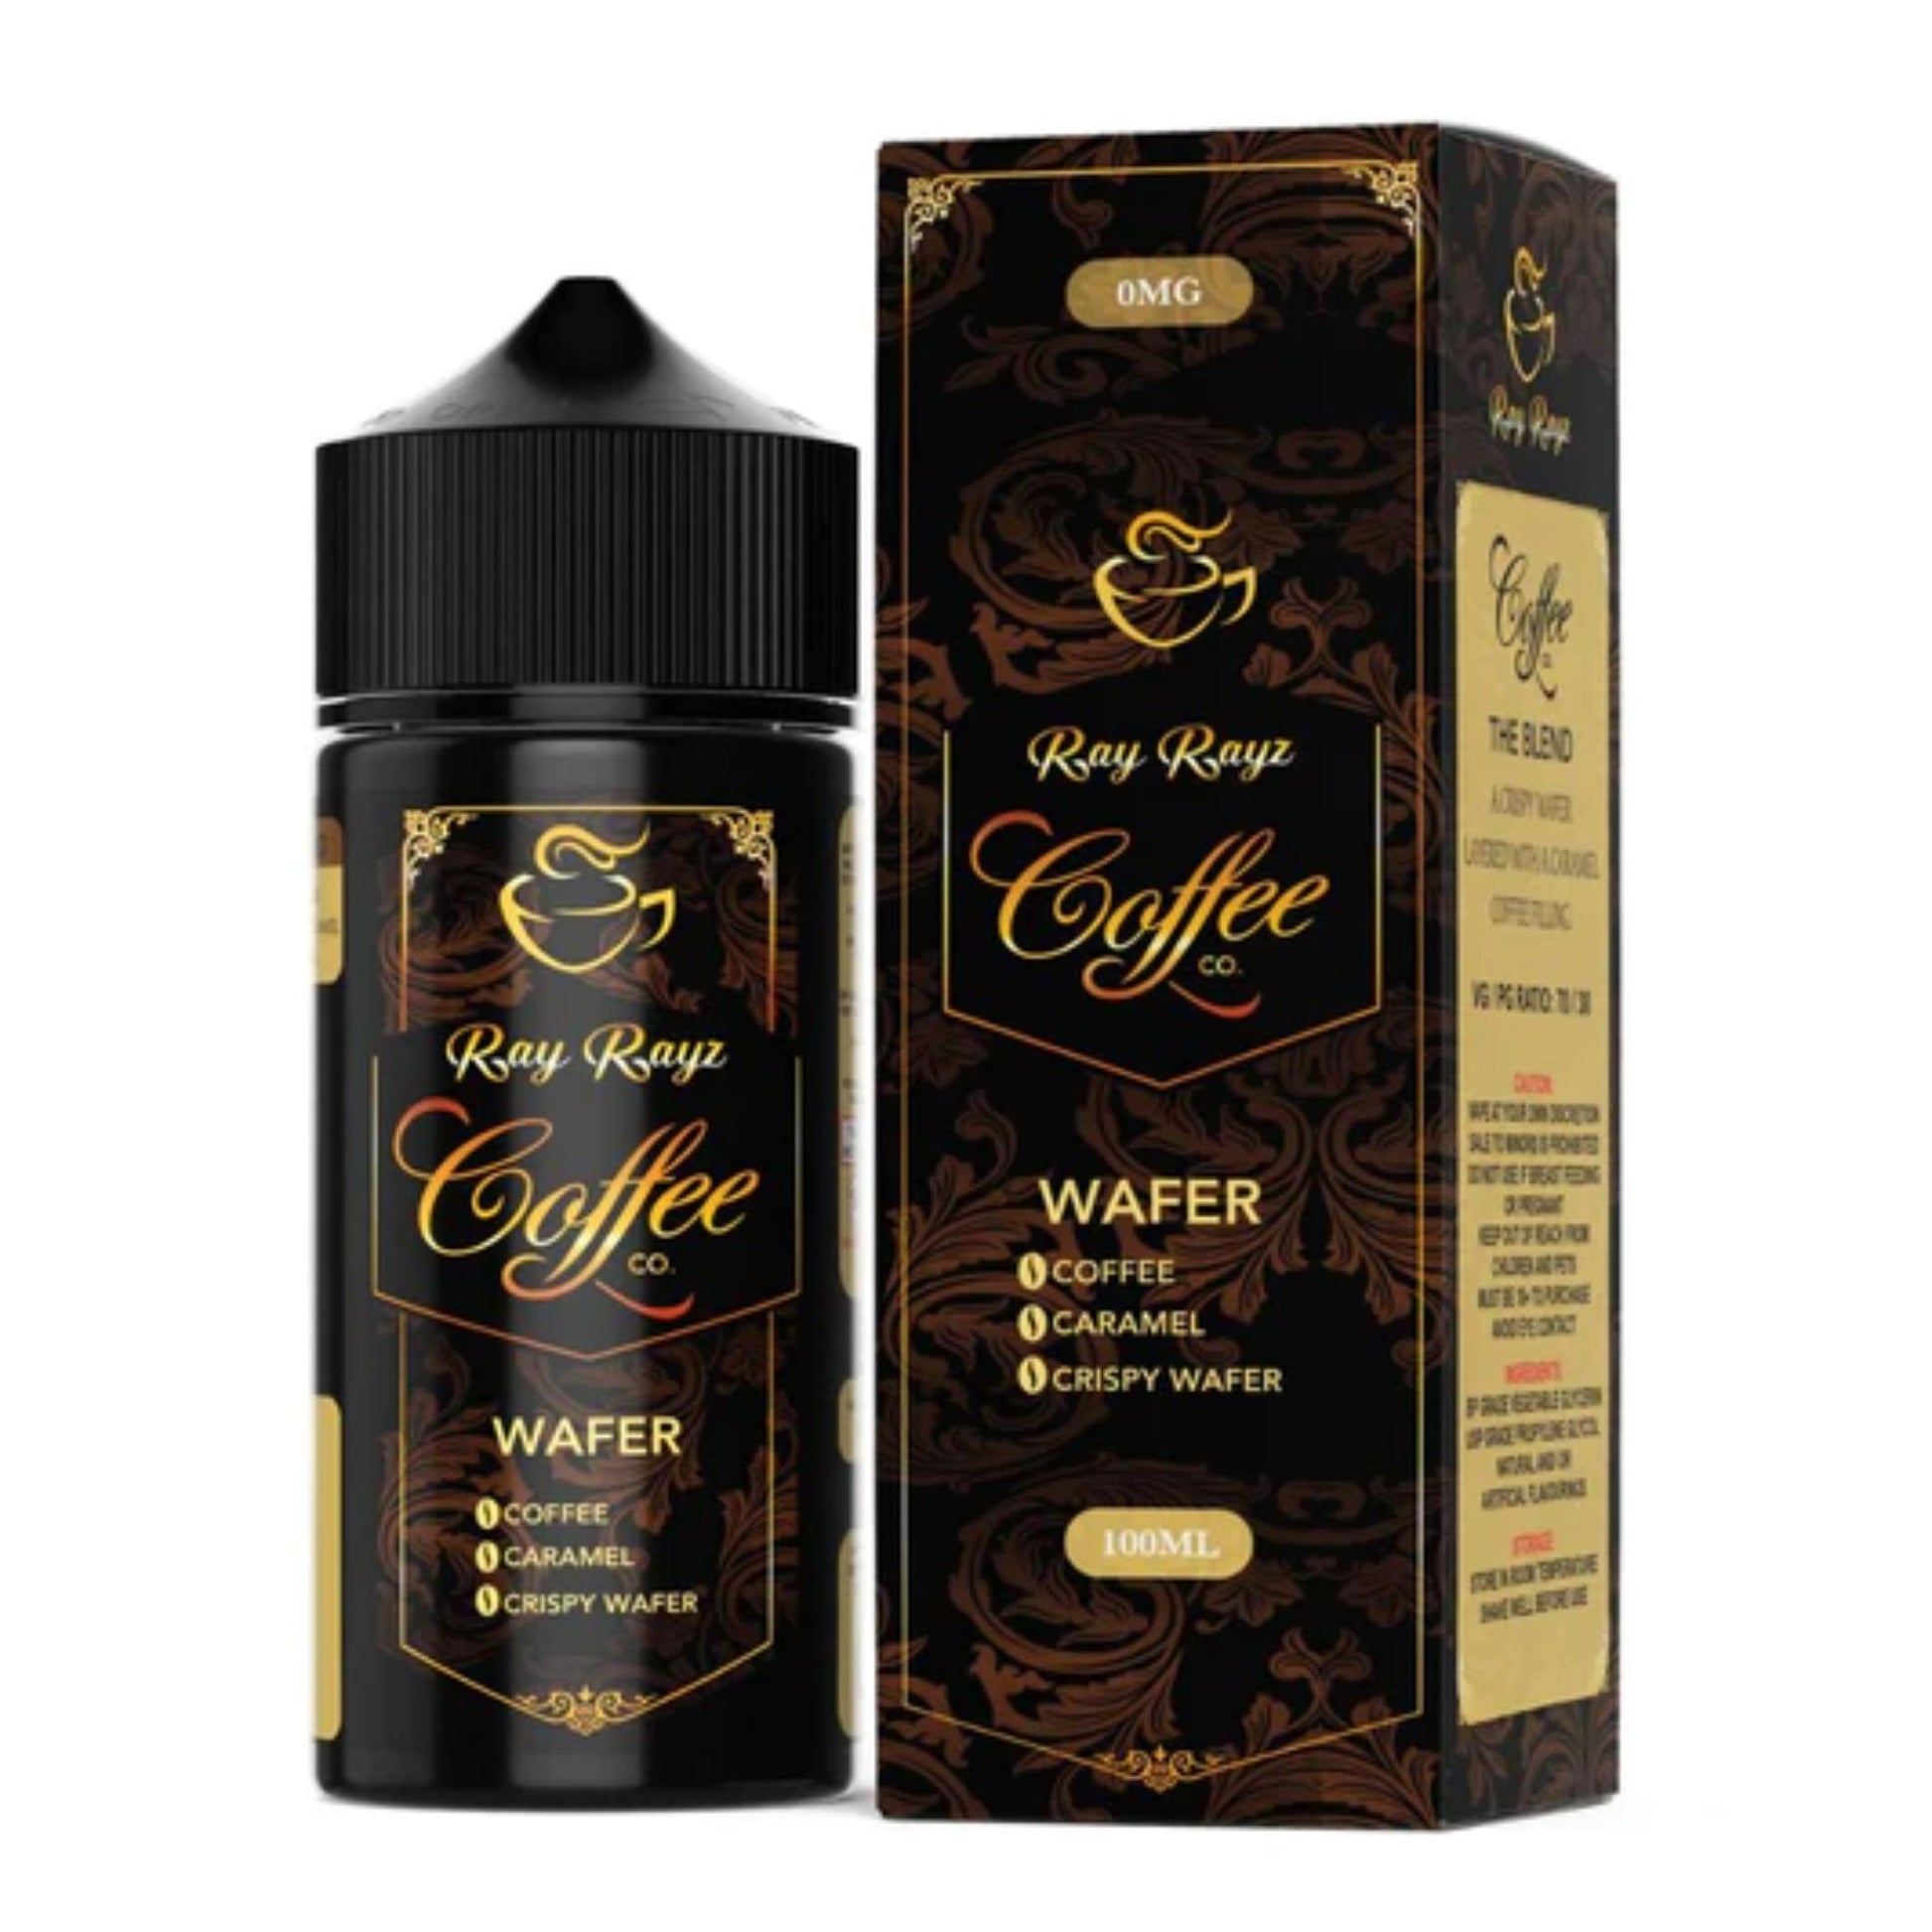 Ray Rayz Coffee Co | Wafer | 100ml bottle and box